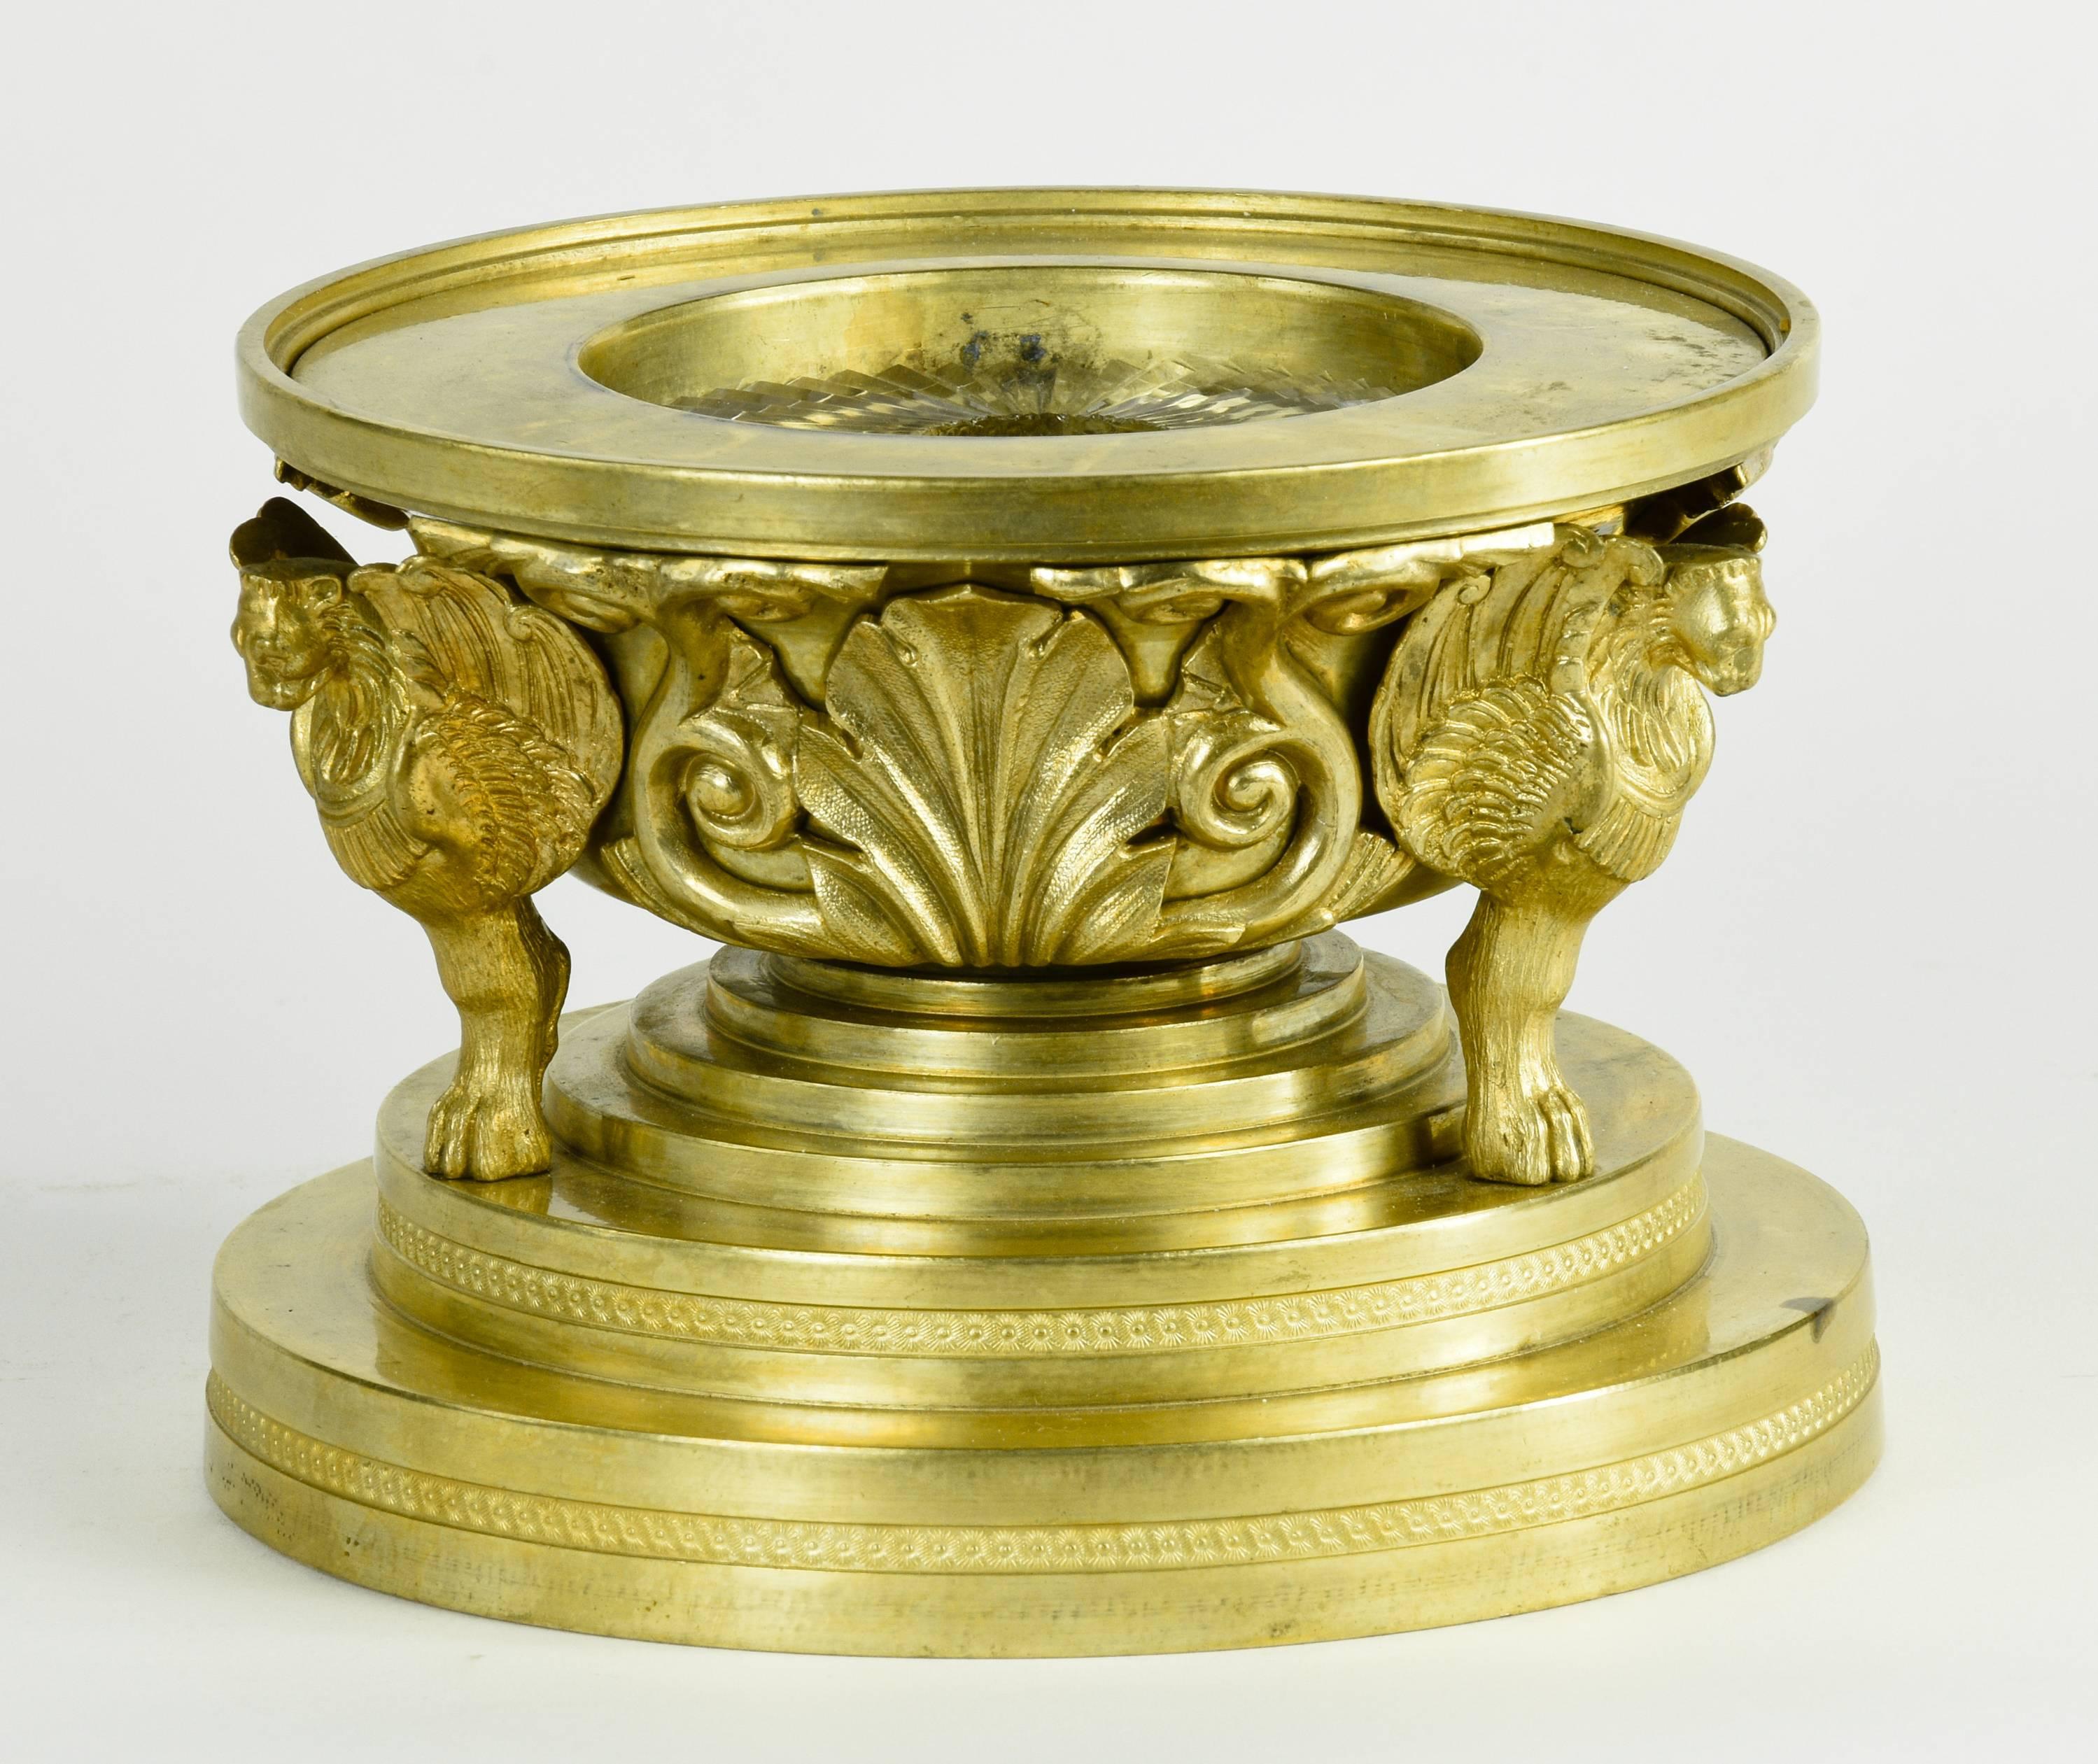 Cast brass lamp with highly detailed lionfoot base on a tied plinth, with glass insert. 
Probably English, circa 1900. 

The elegant and highly detailed neoclassical brass lamp is designed in the form of a Roman tazza supported by three